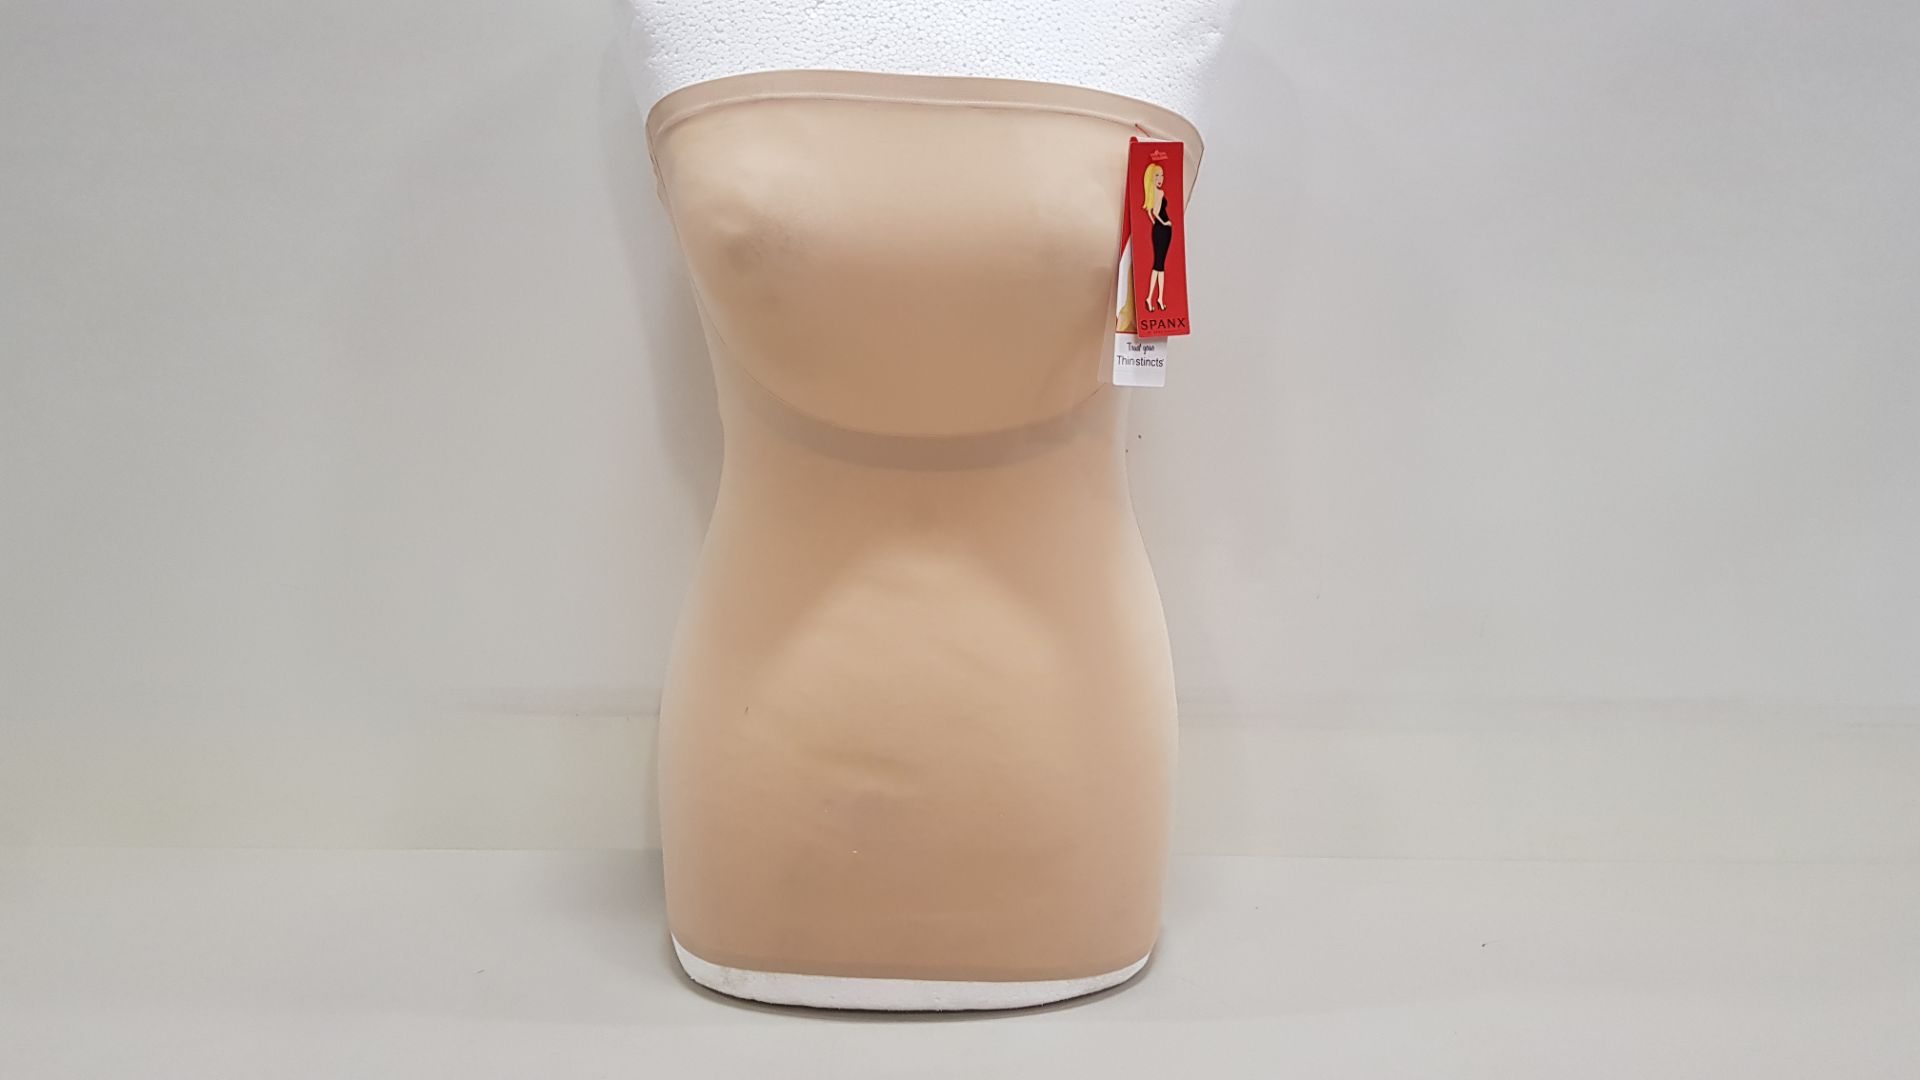 28 X BRAND NEW SPANX THIN-STINCTS, NATURAL, STRAPLESS TOP - SIZE LARGE (EBAY £18.99 - TOTAL £531)